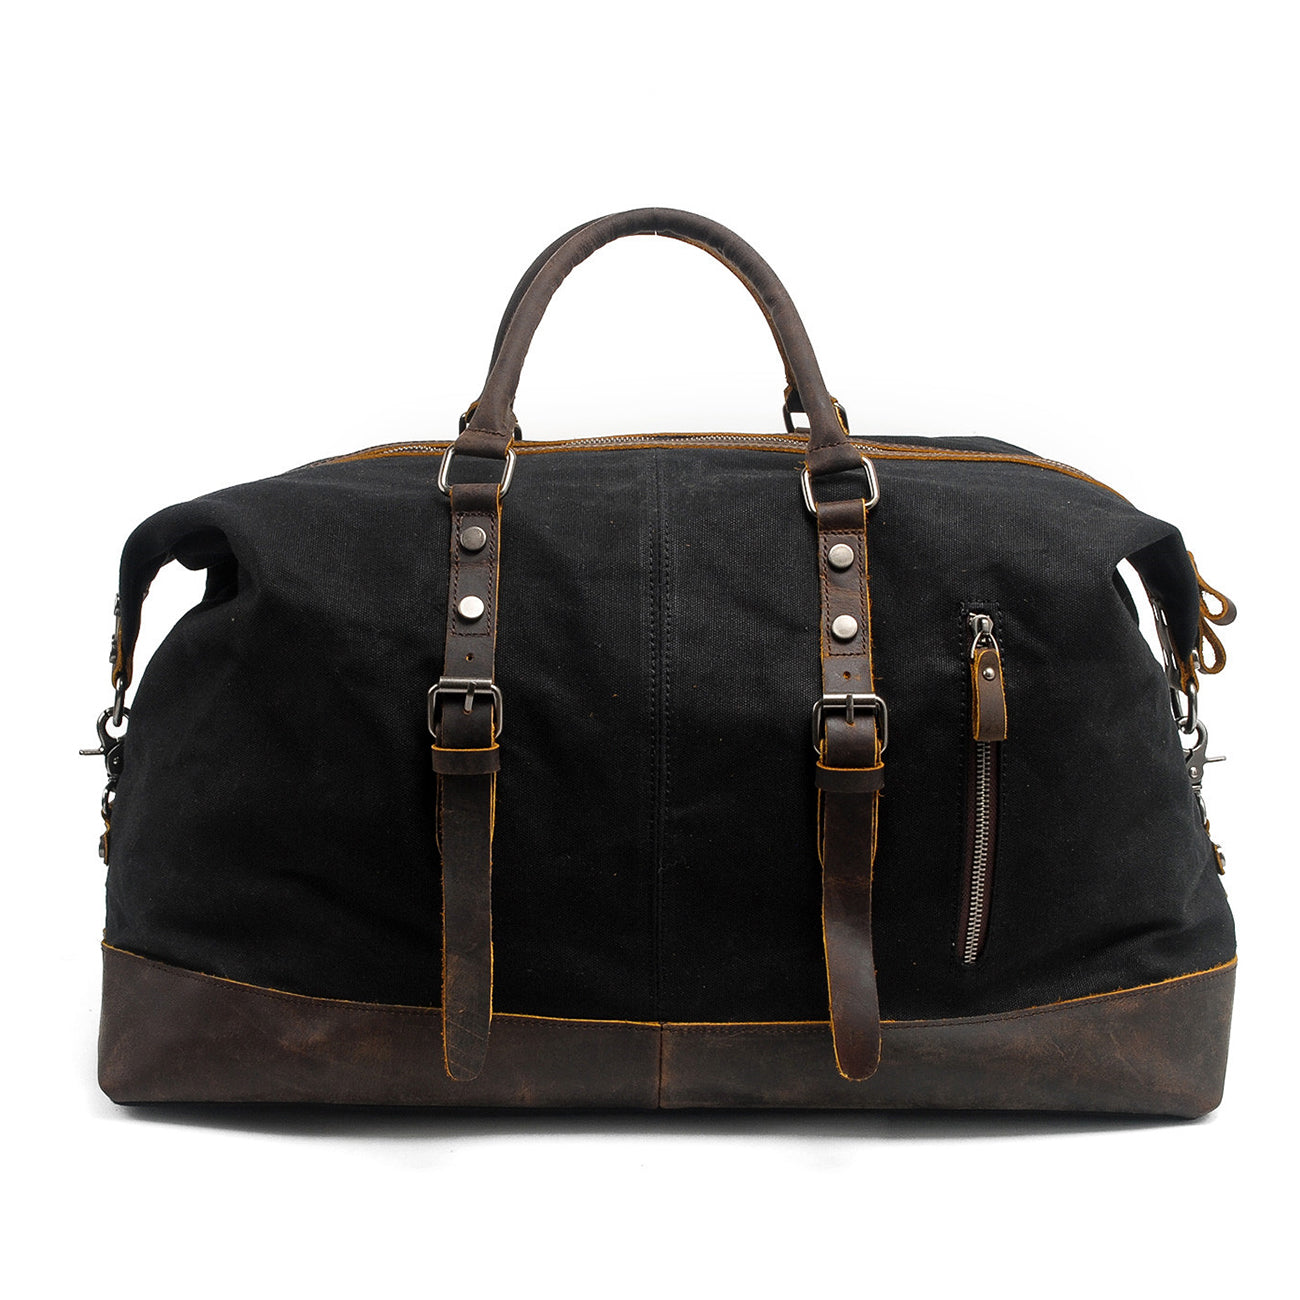 old school Duffle Bag with genuine leather straps and top handles